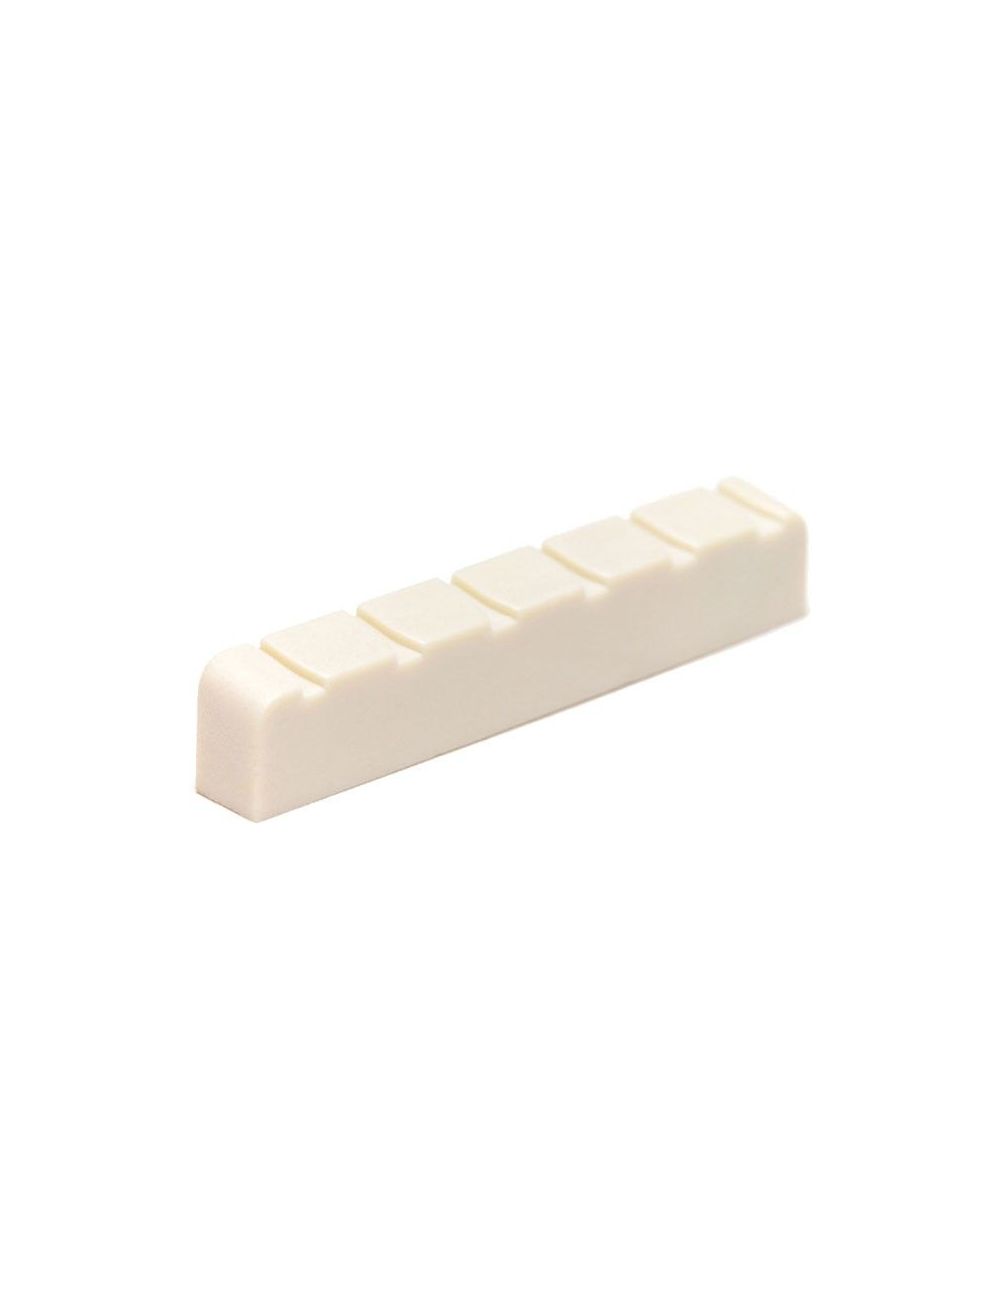 Classical guitar nut Alhambra 9657 9657 Spare parts